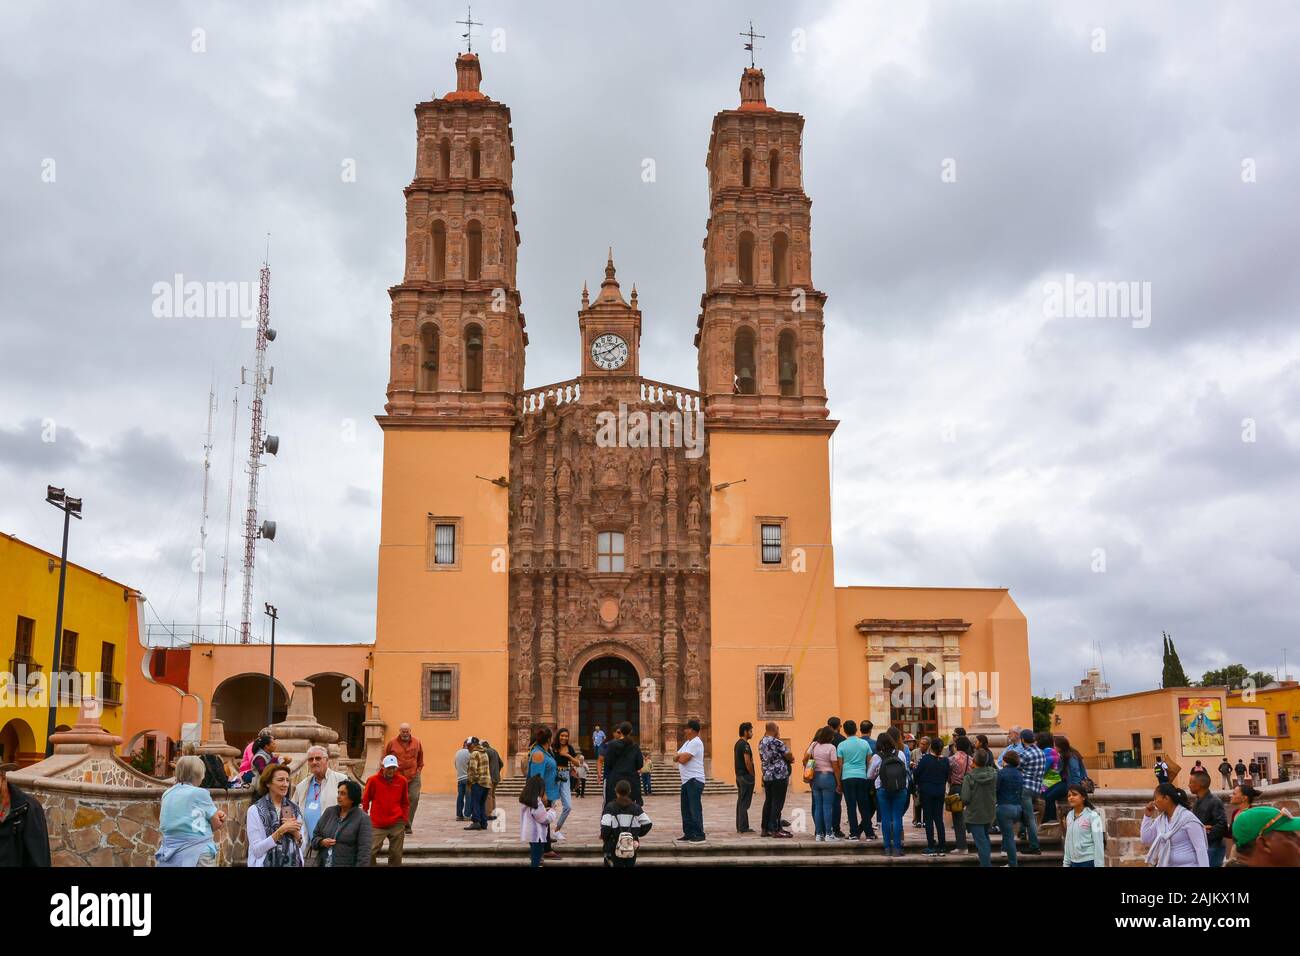 Tourists gather in front of the Church of Our Lady of Sorrows, Dolores Hidalgo, Mexico. Stock Photo